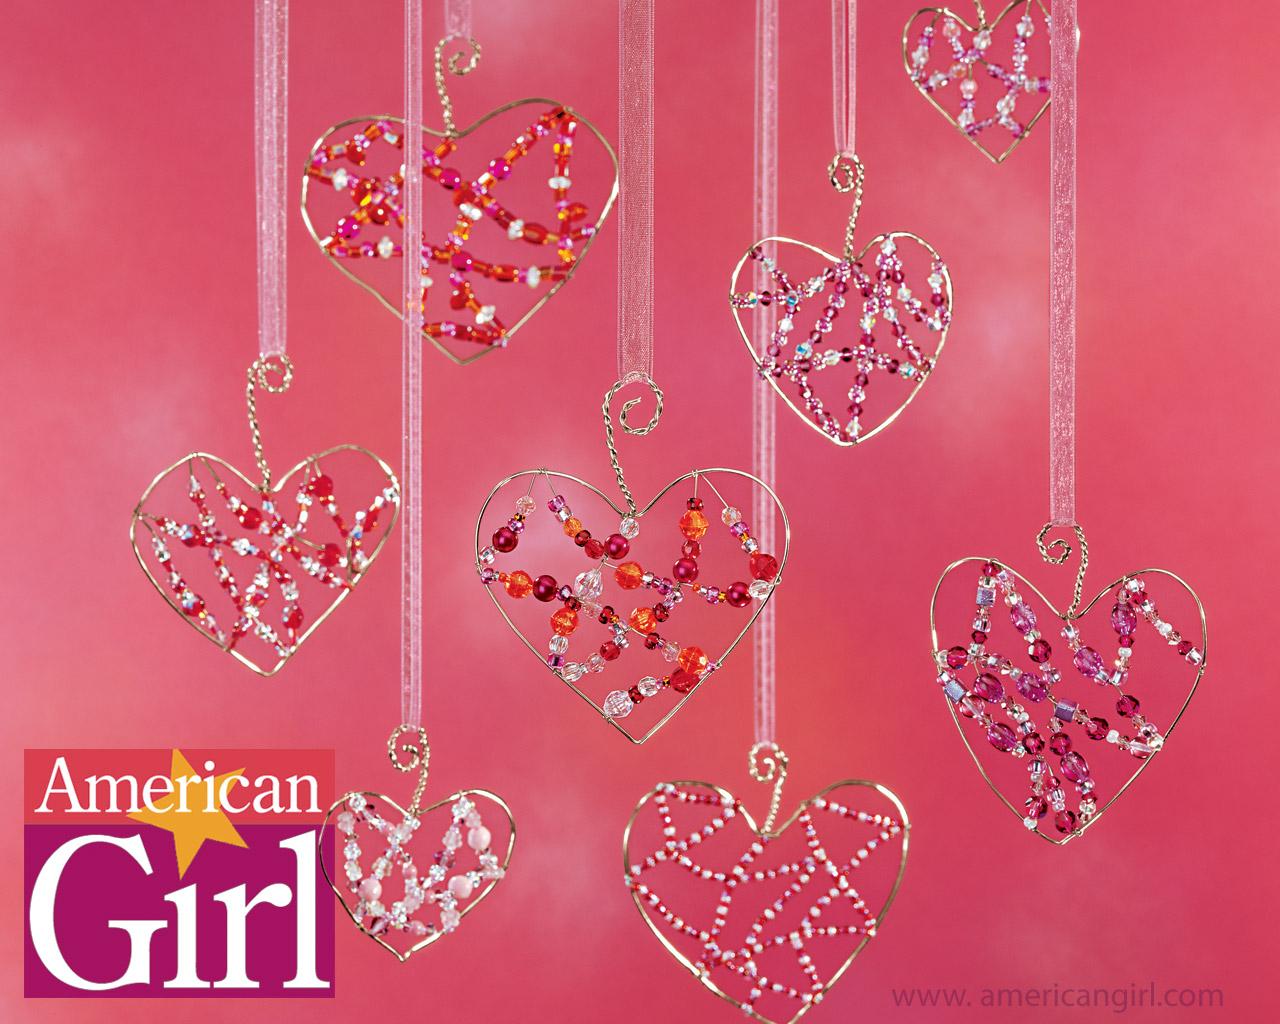 Free download American Girl magazine feature [1280x1024]